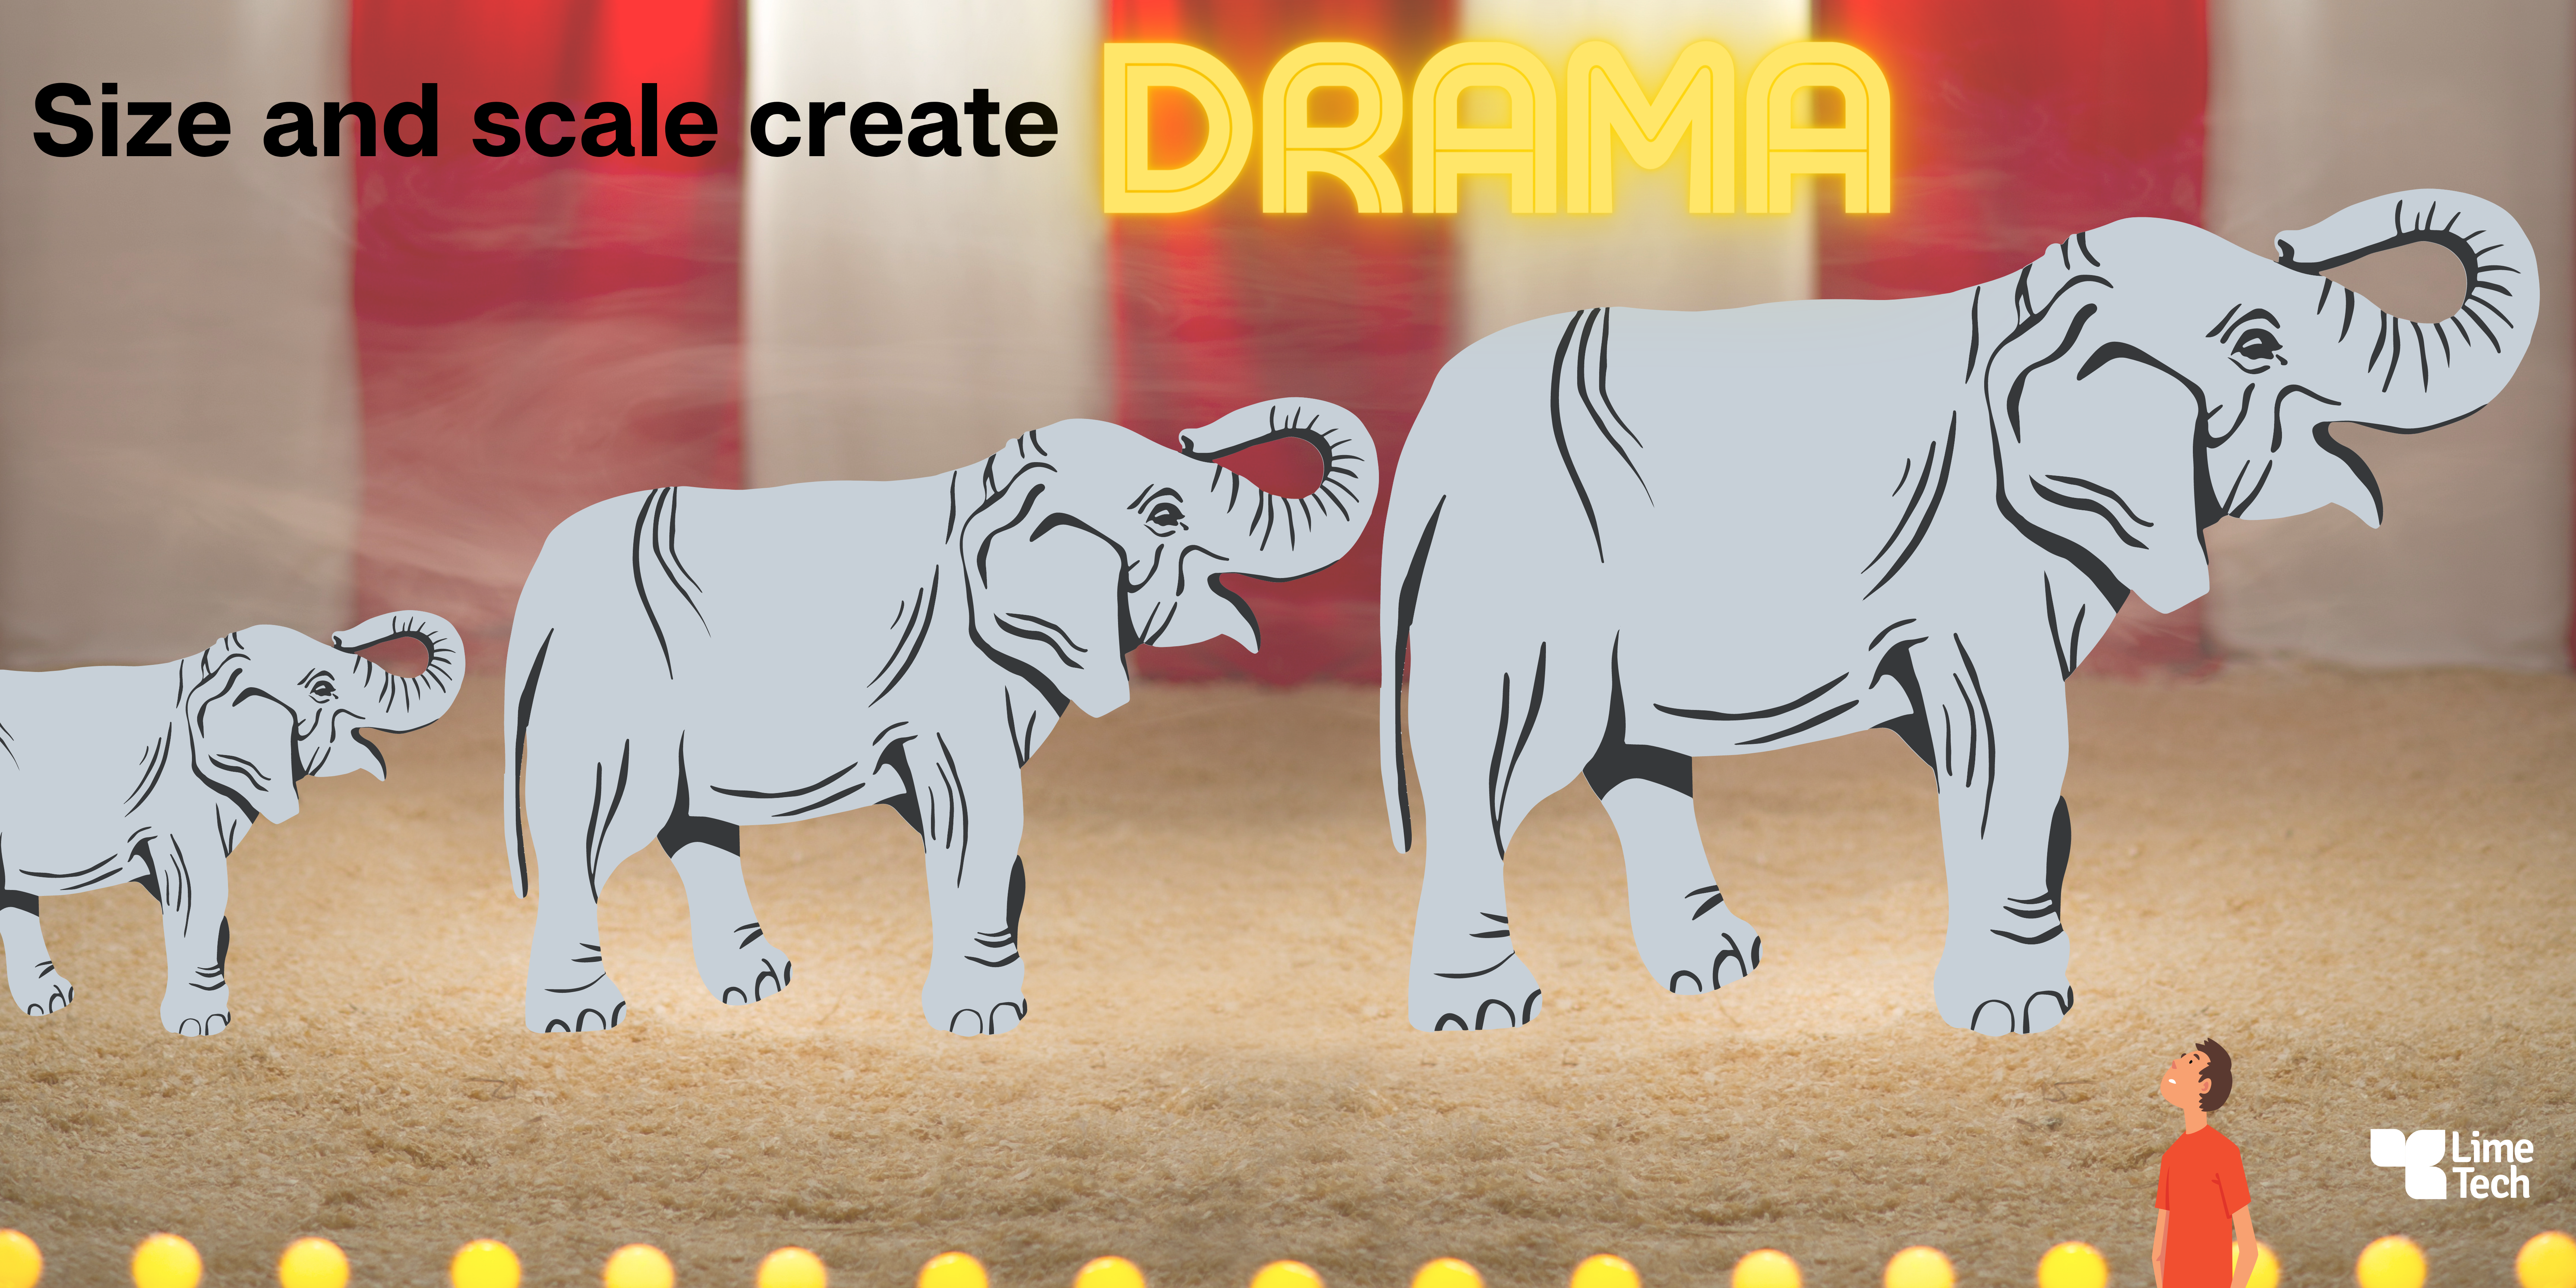 size and scale create drama with three elephants of increasing size